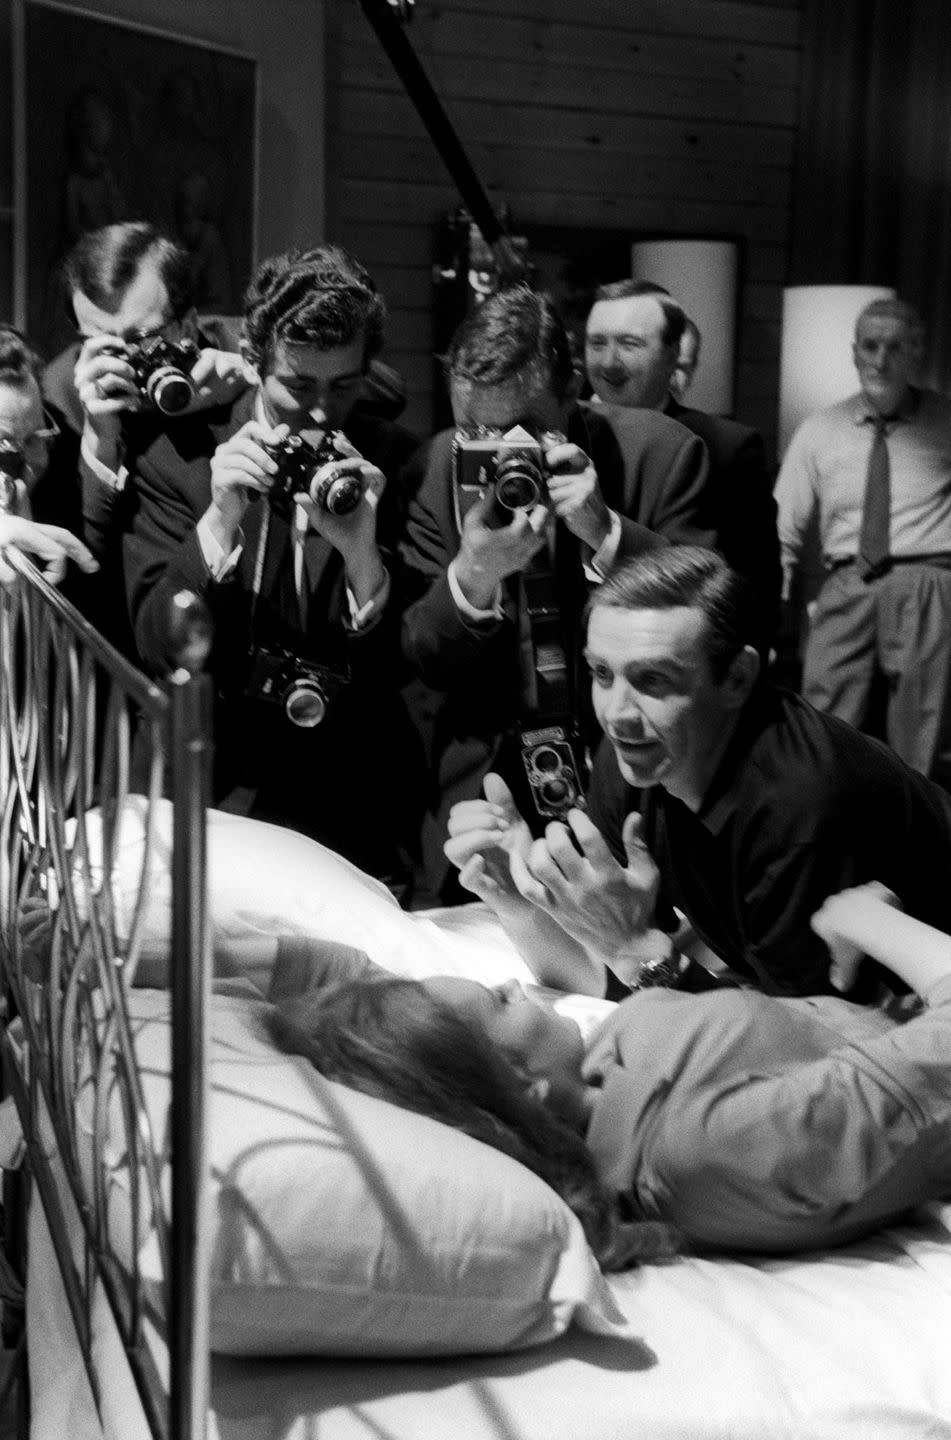 Take a Look at These Behind-the-Scenes Photos From James Bond Films, Starting at Dr. No